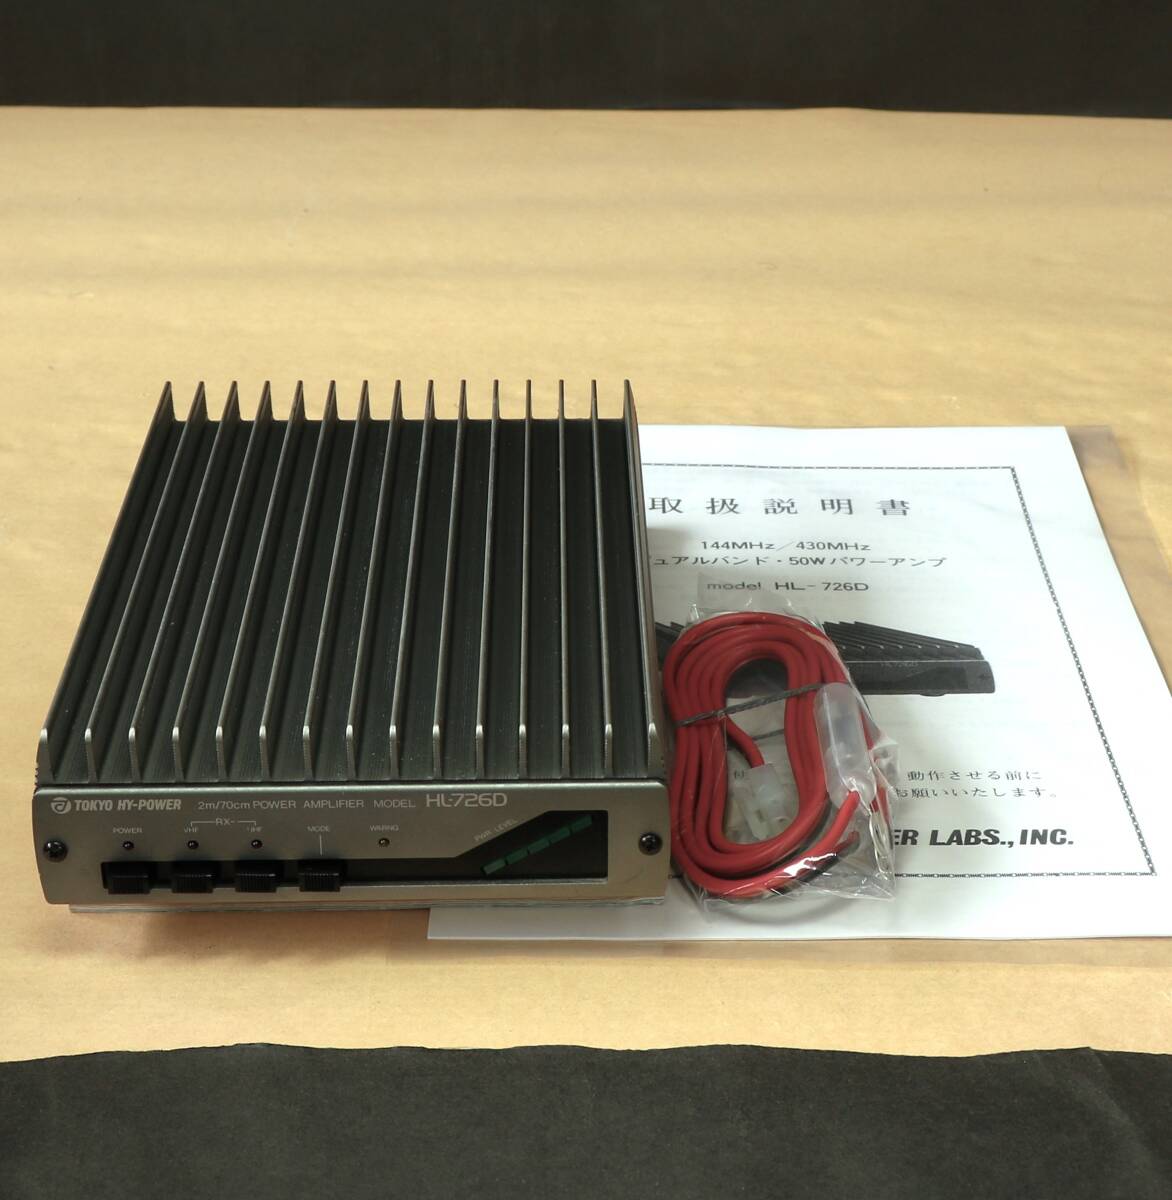 TOKYO HY-POWER Tokyo high power HL-726D 145/430M Hz band all mode dual amplifier ( copy manual * circuit map attaching )